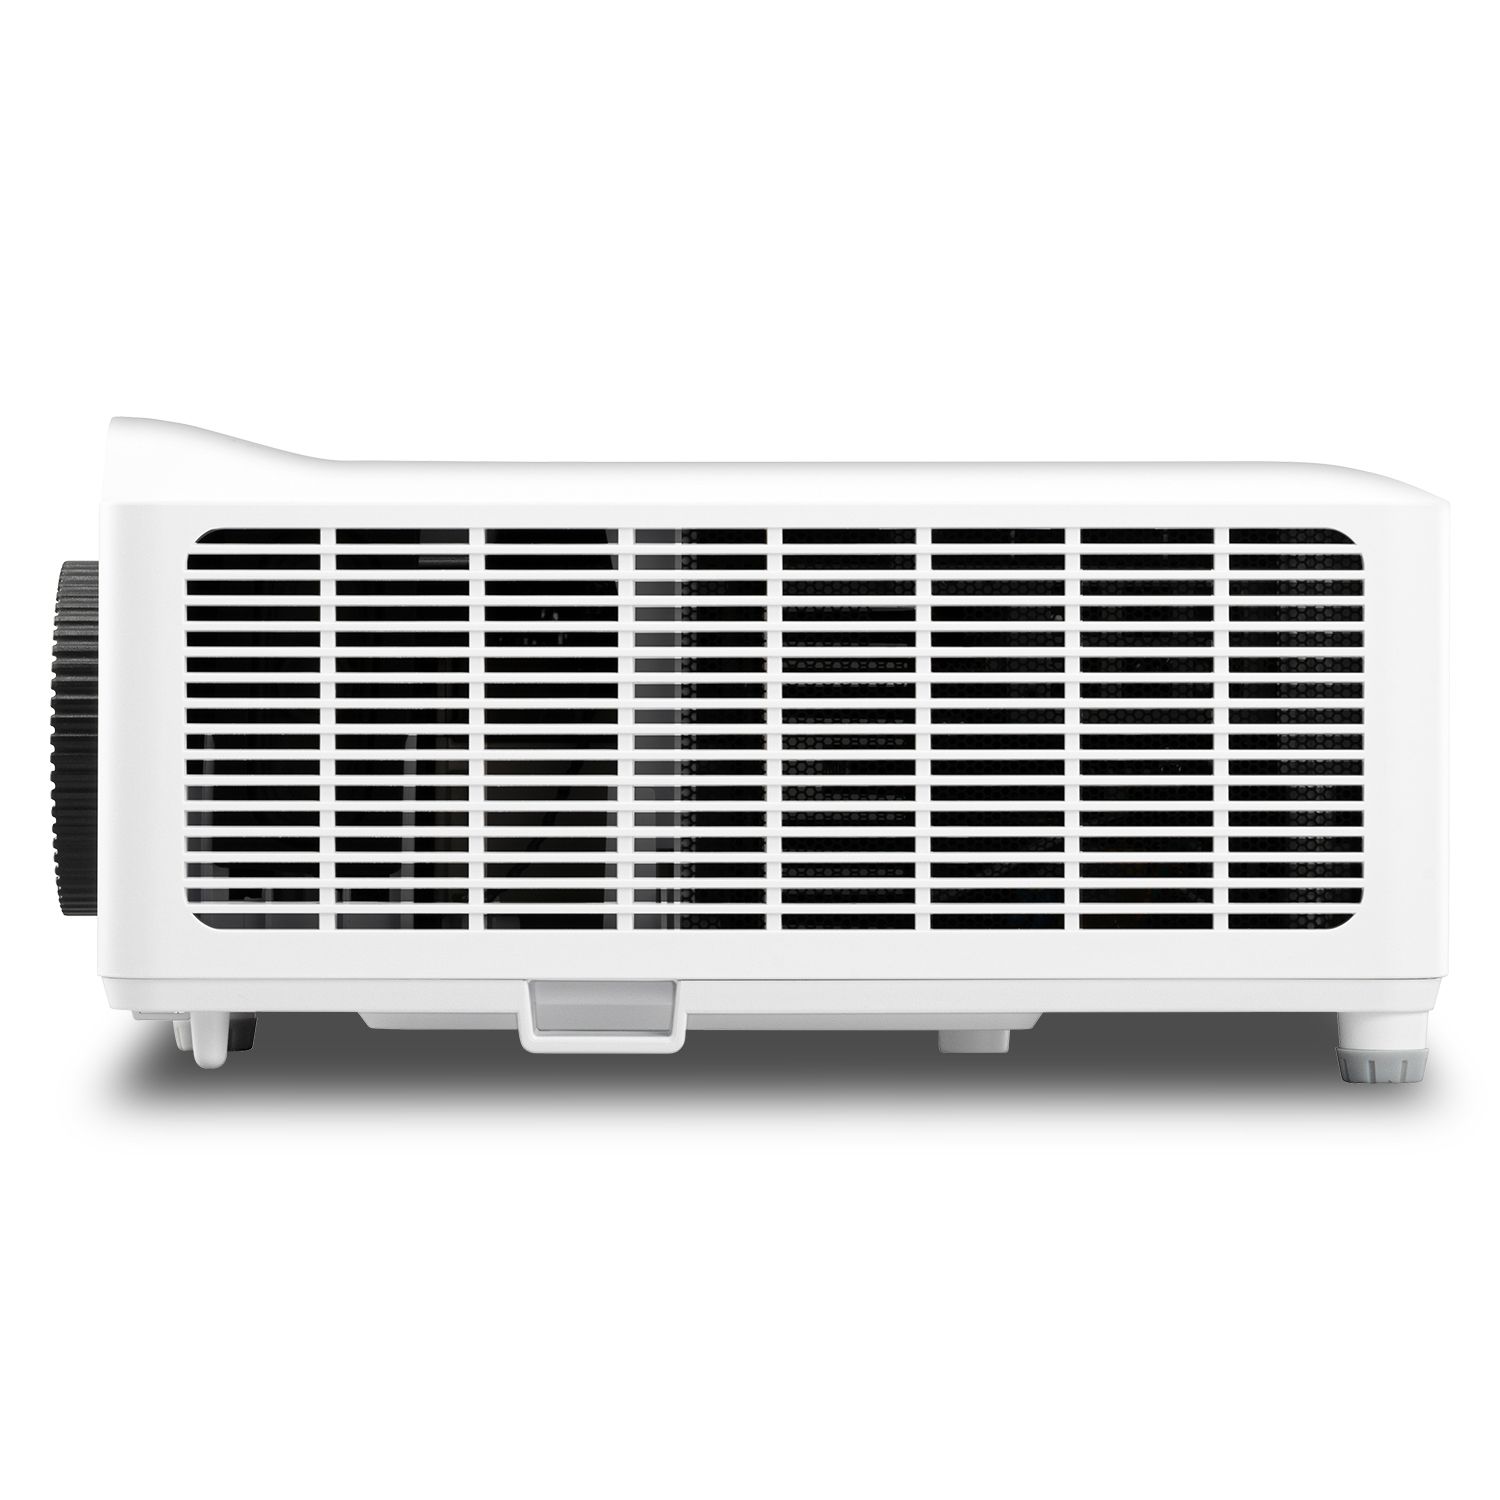 ViewSonic LS751HD - Full HD - 5000 Ansi - 3000000:1 Contrast - Laser Projector - White